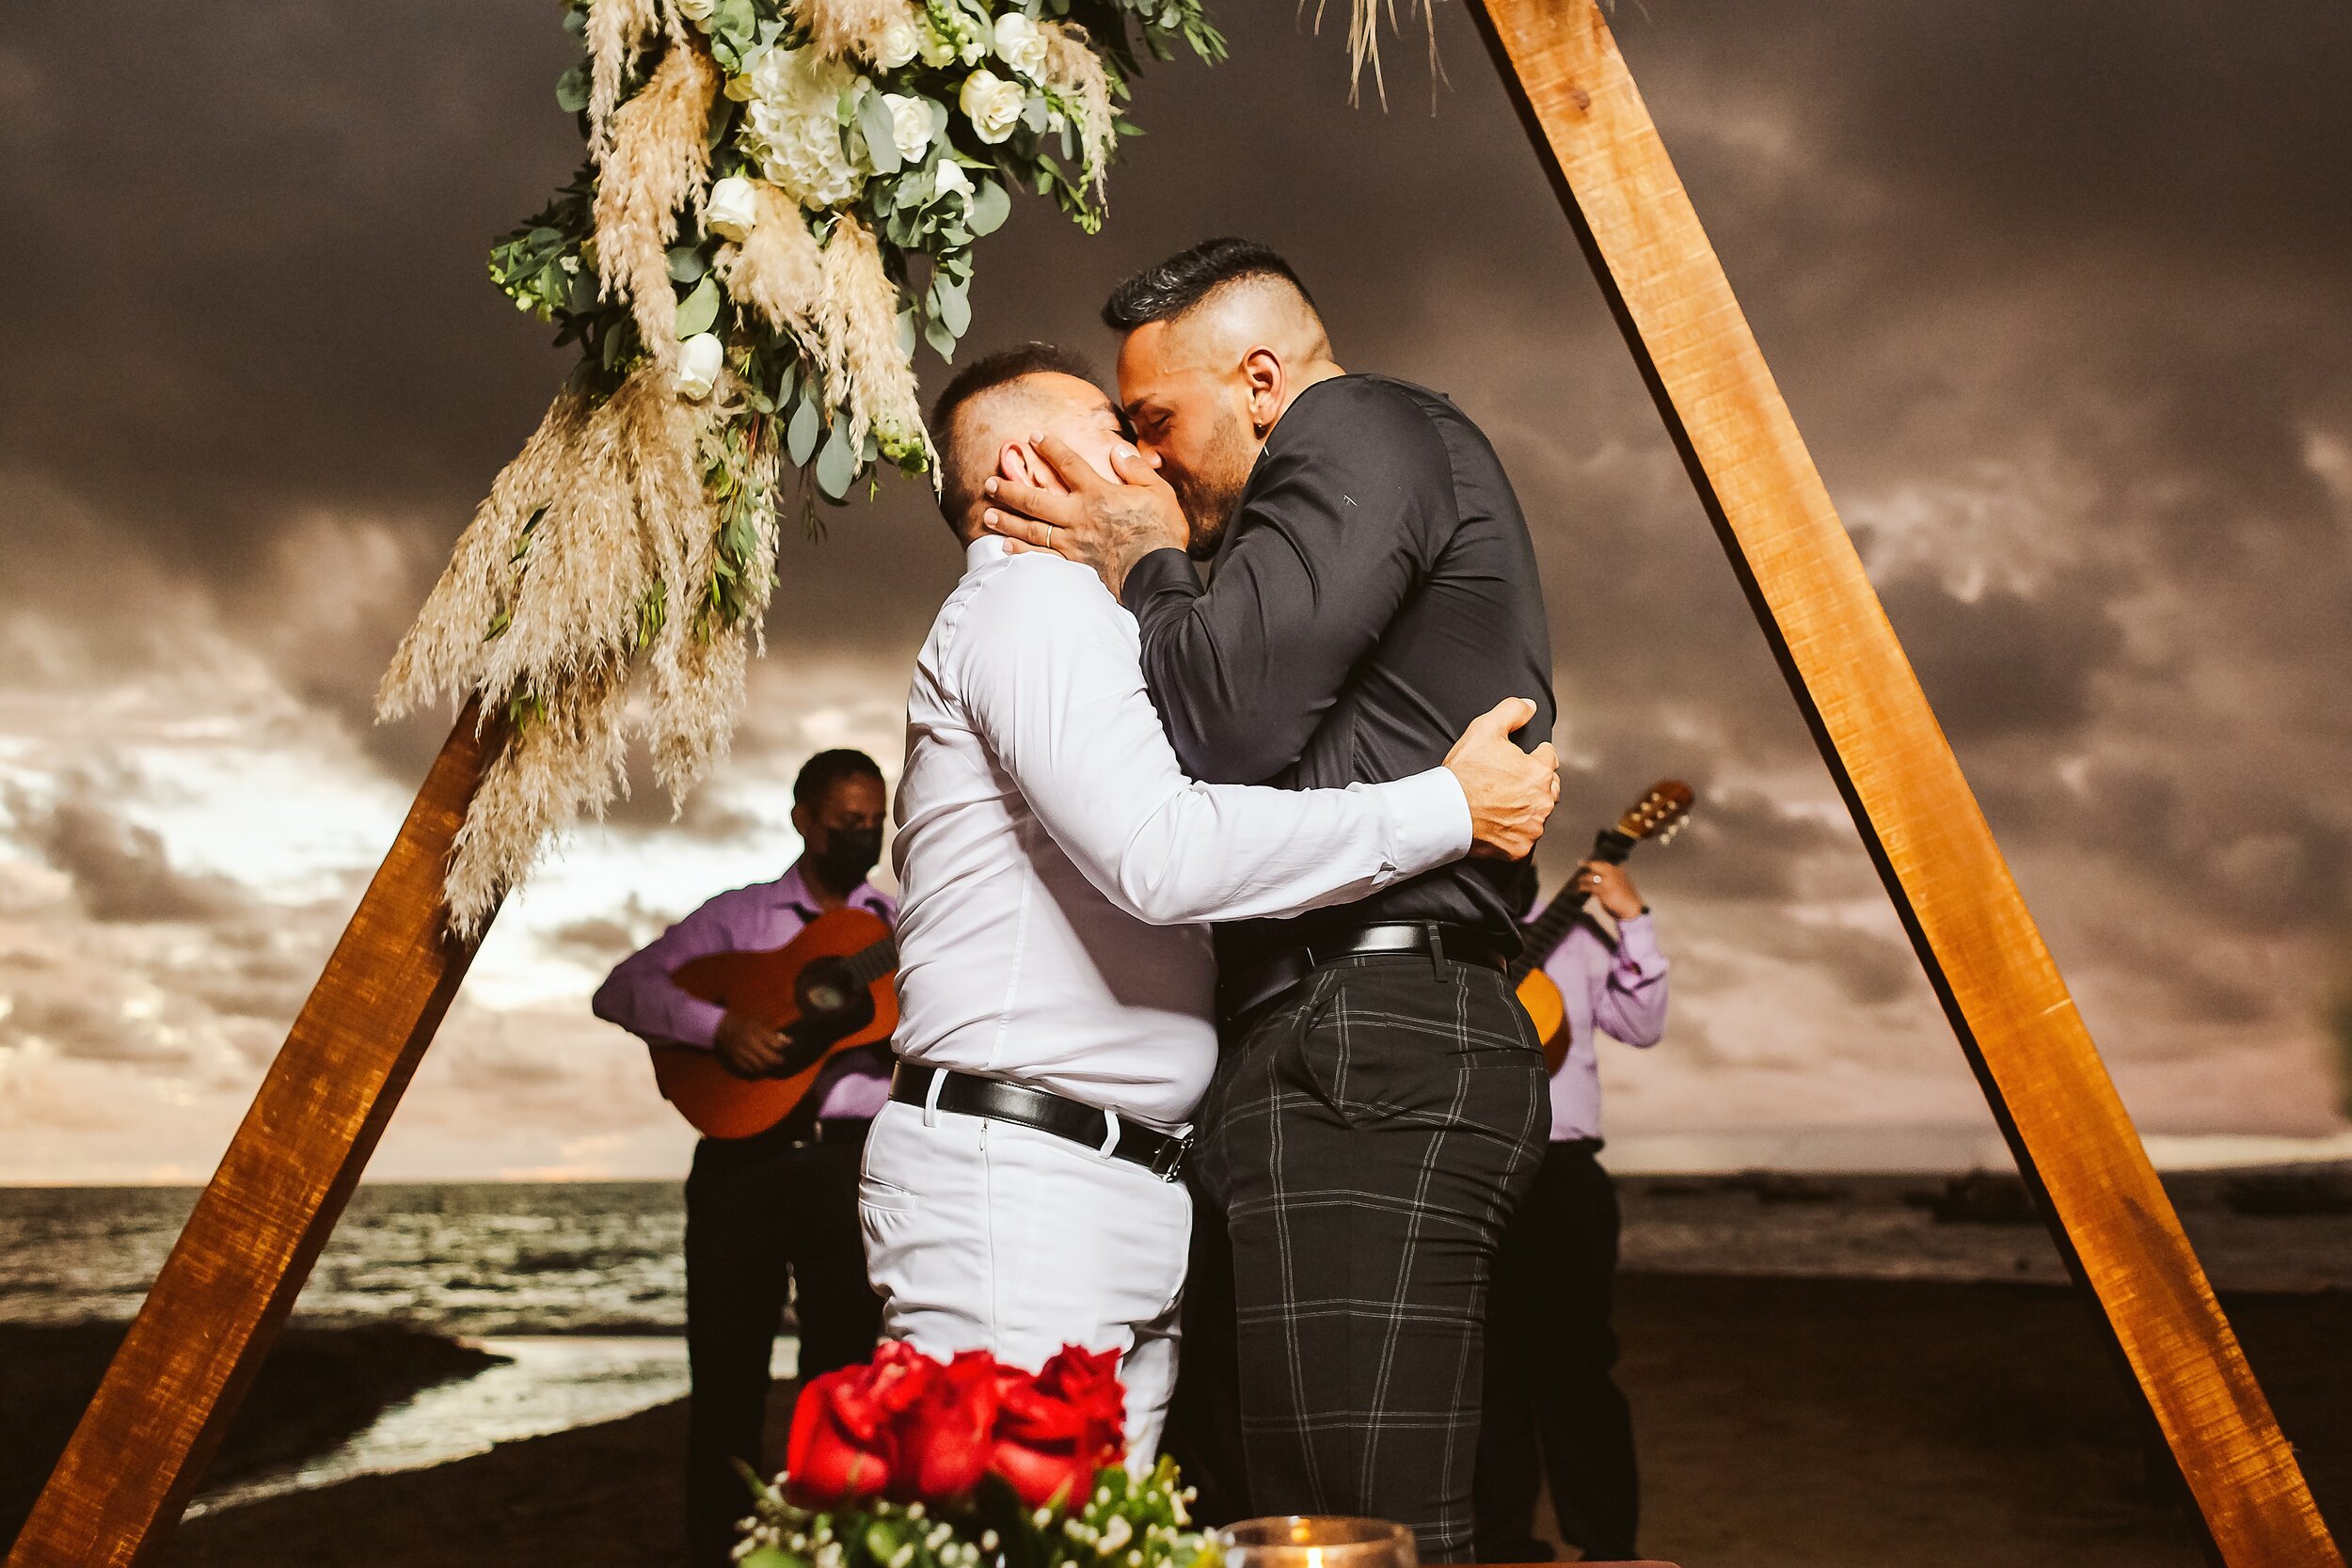 La Palapa — Wedding photographer in Mexico // Puerto Vallarta and Cabo San Lucas — Your wedding, the WAY it should be told!